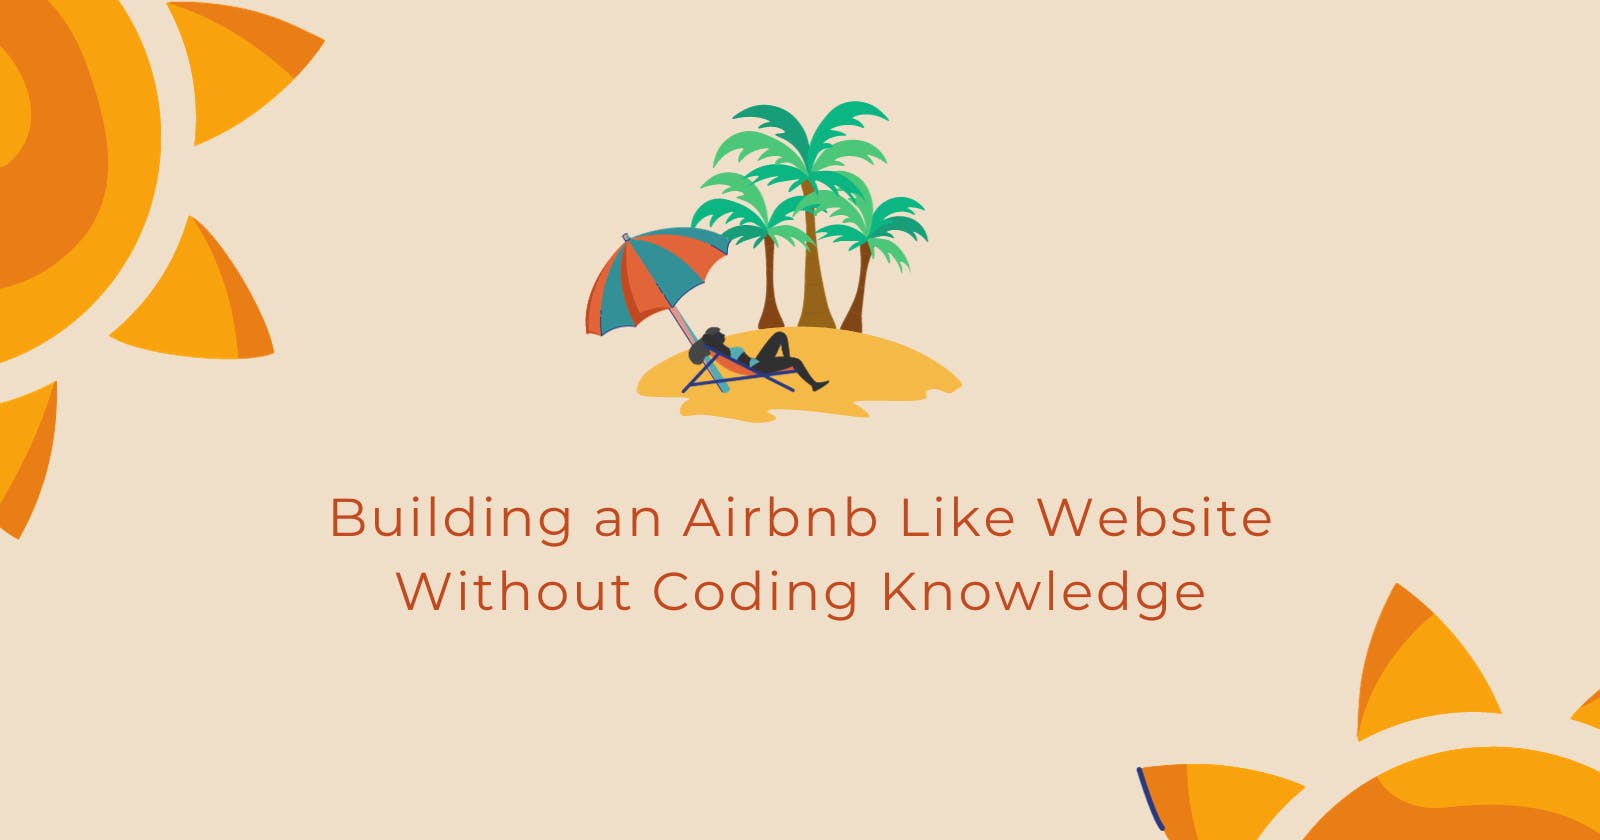 How I Build an Airbnb Like Website Without Coding Knowledge